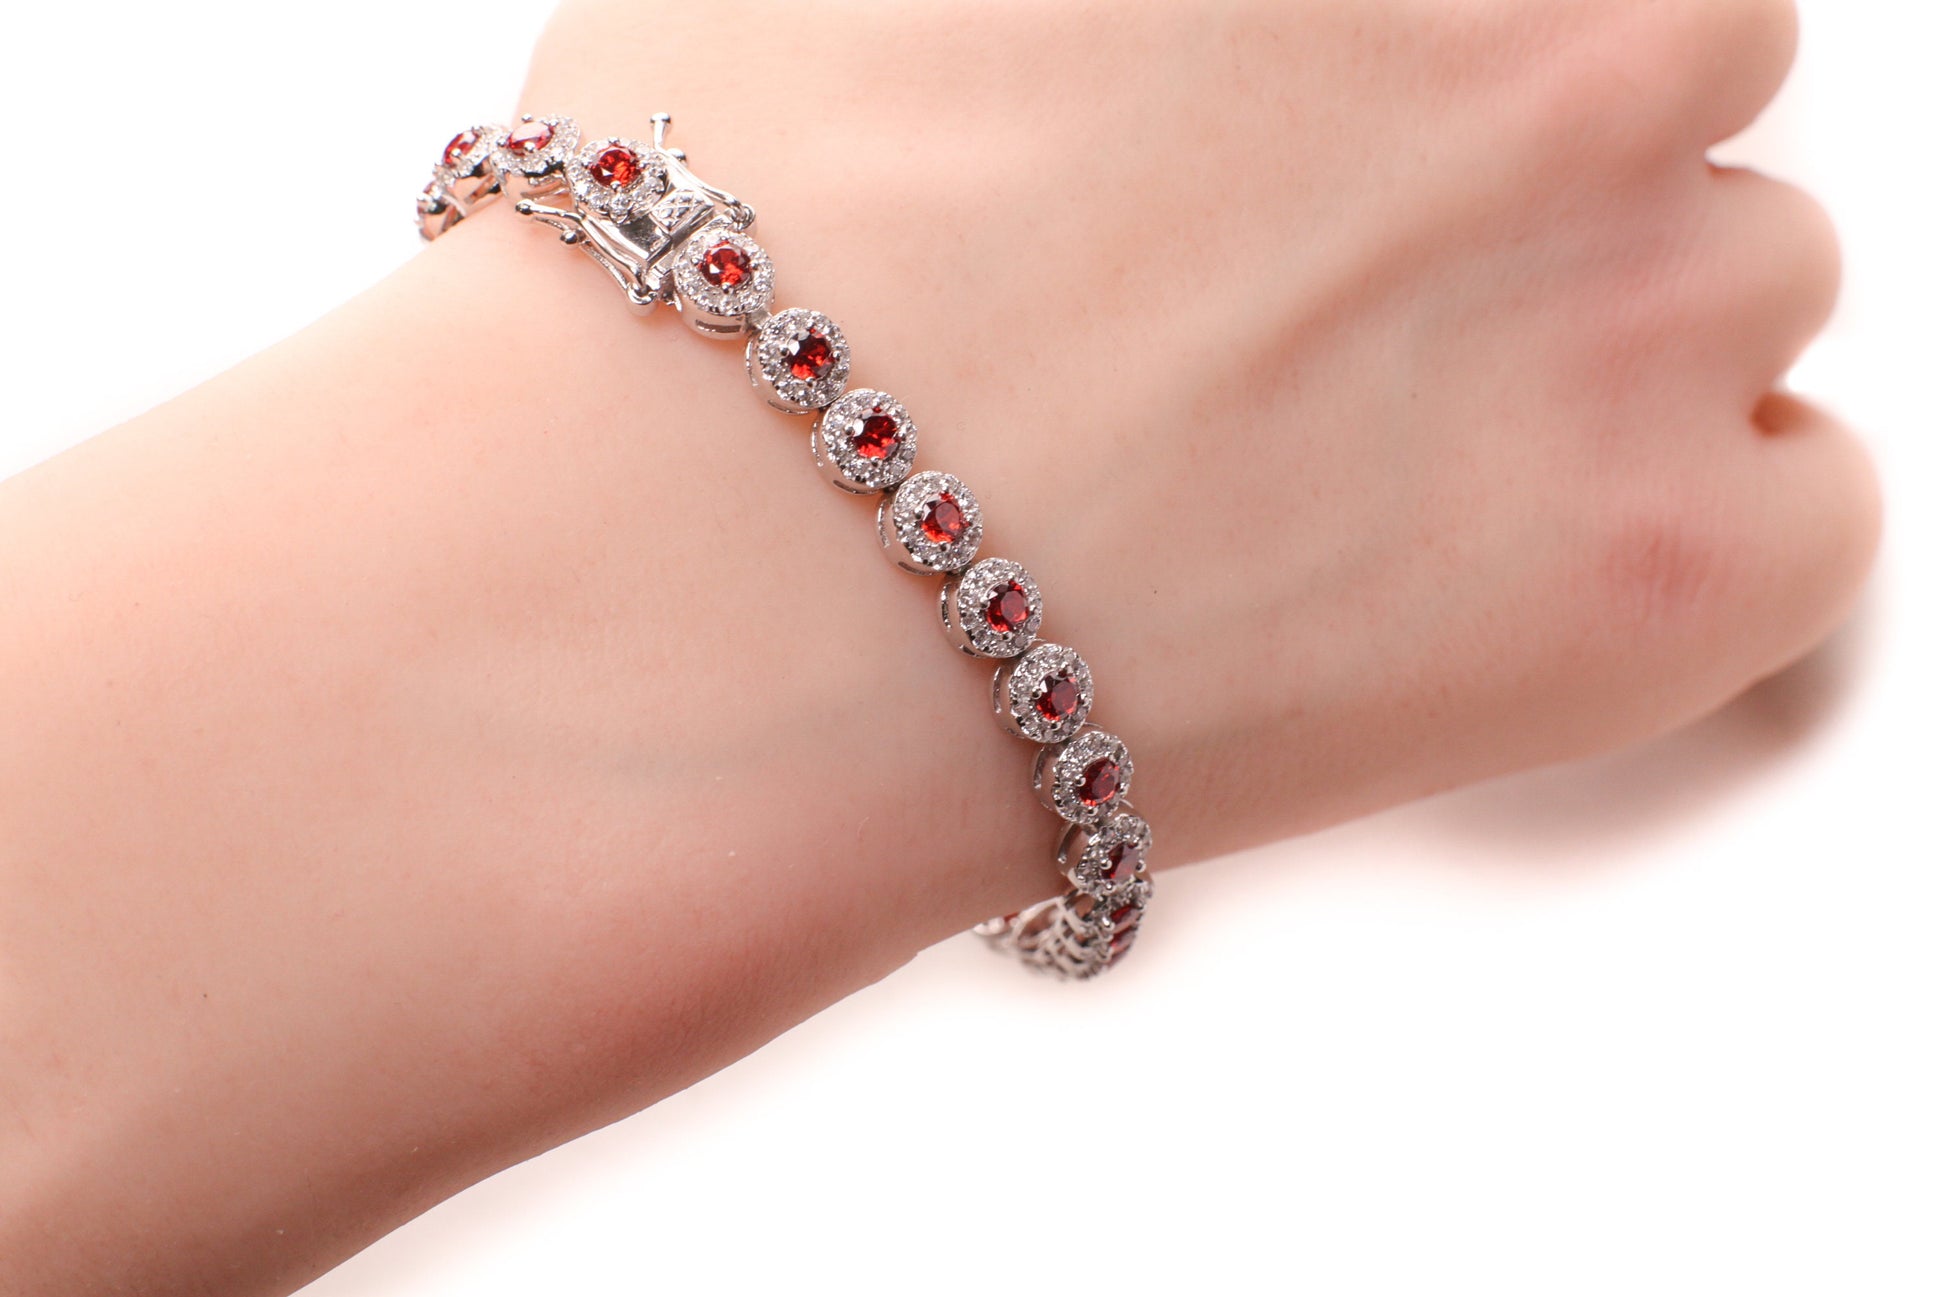 Garnet round shape 6mm CZ Diamond setting 925 Sterling Silver Tennis Bracelet with Double Safety Lock 7" beautiful gift